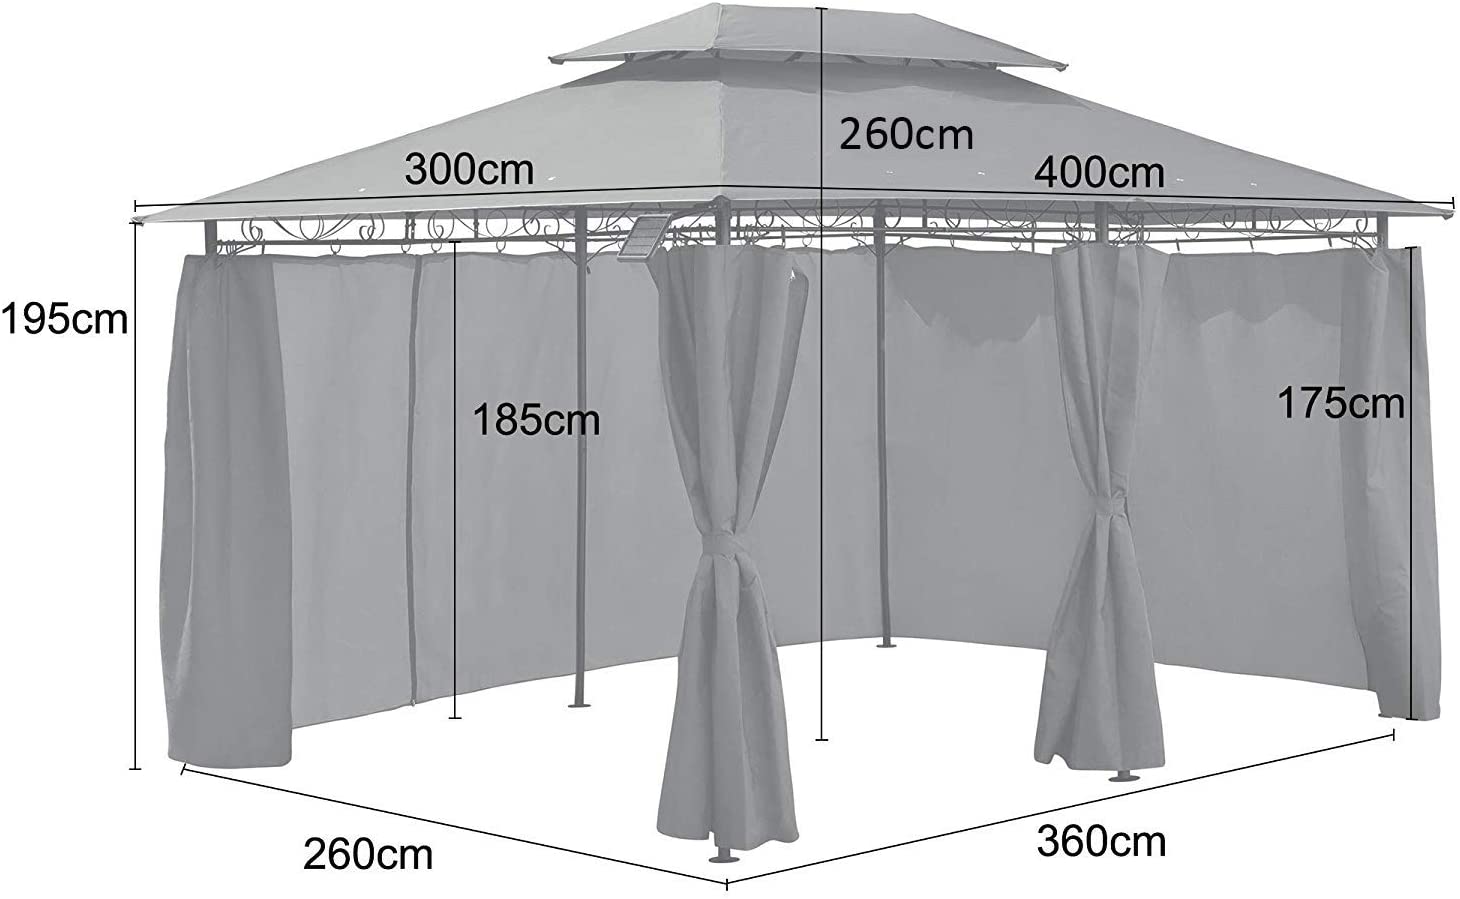 St Lucia 3 x 4m Gazebo with Curtains Canopy Party Tent with 60pcs Solar LED Lights in Beige